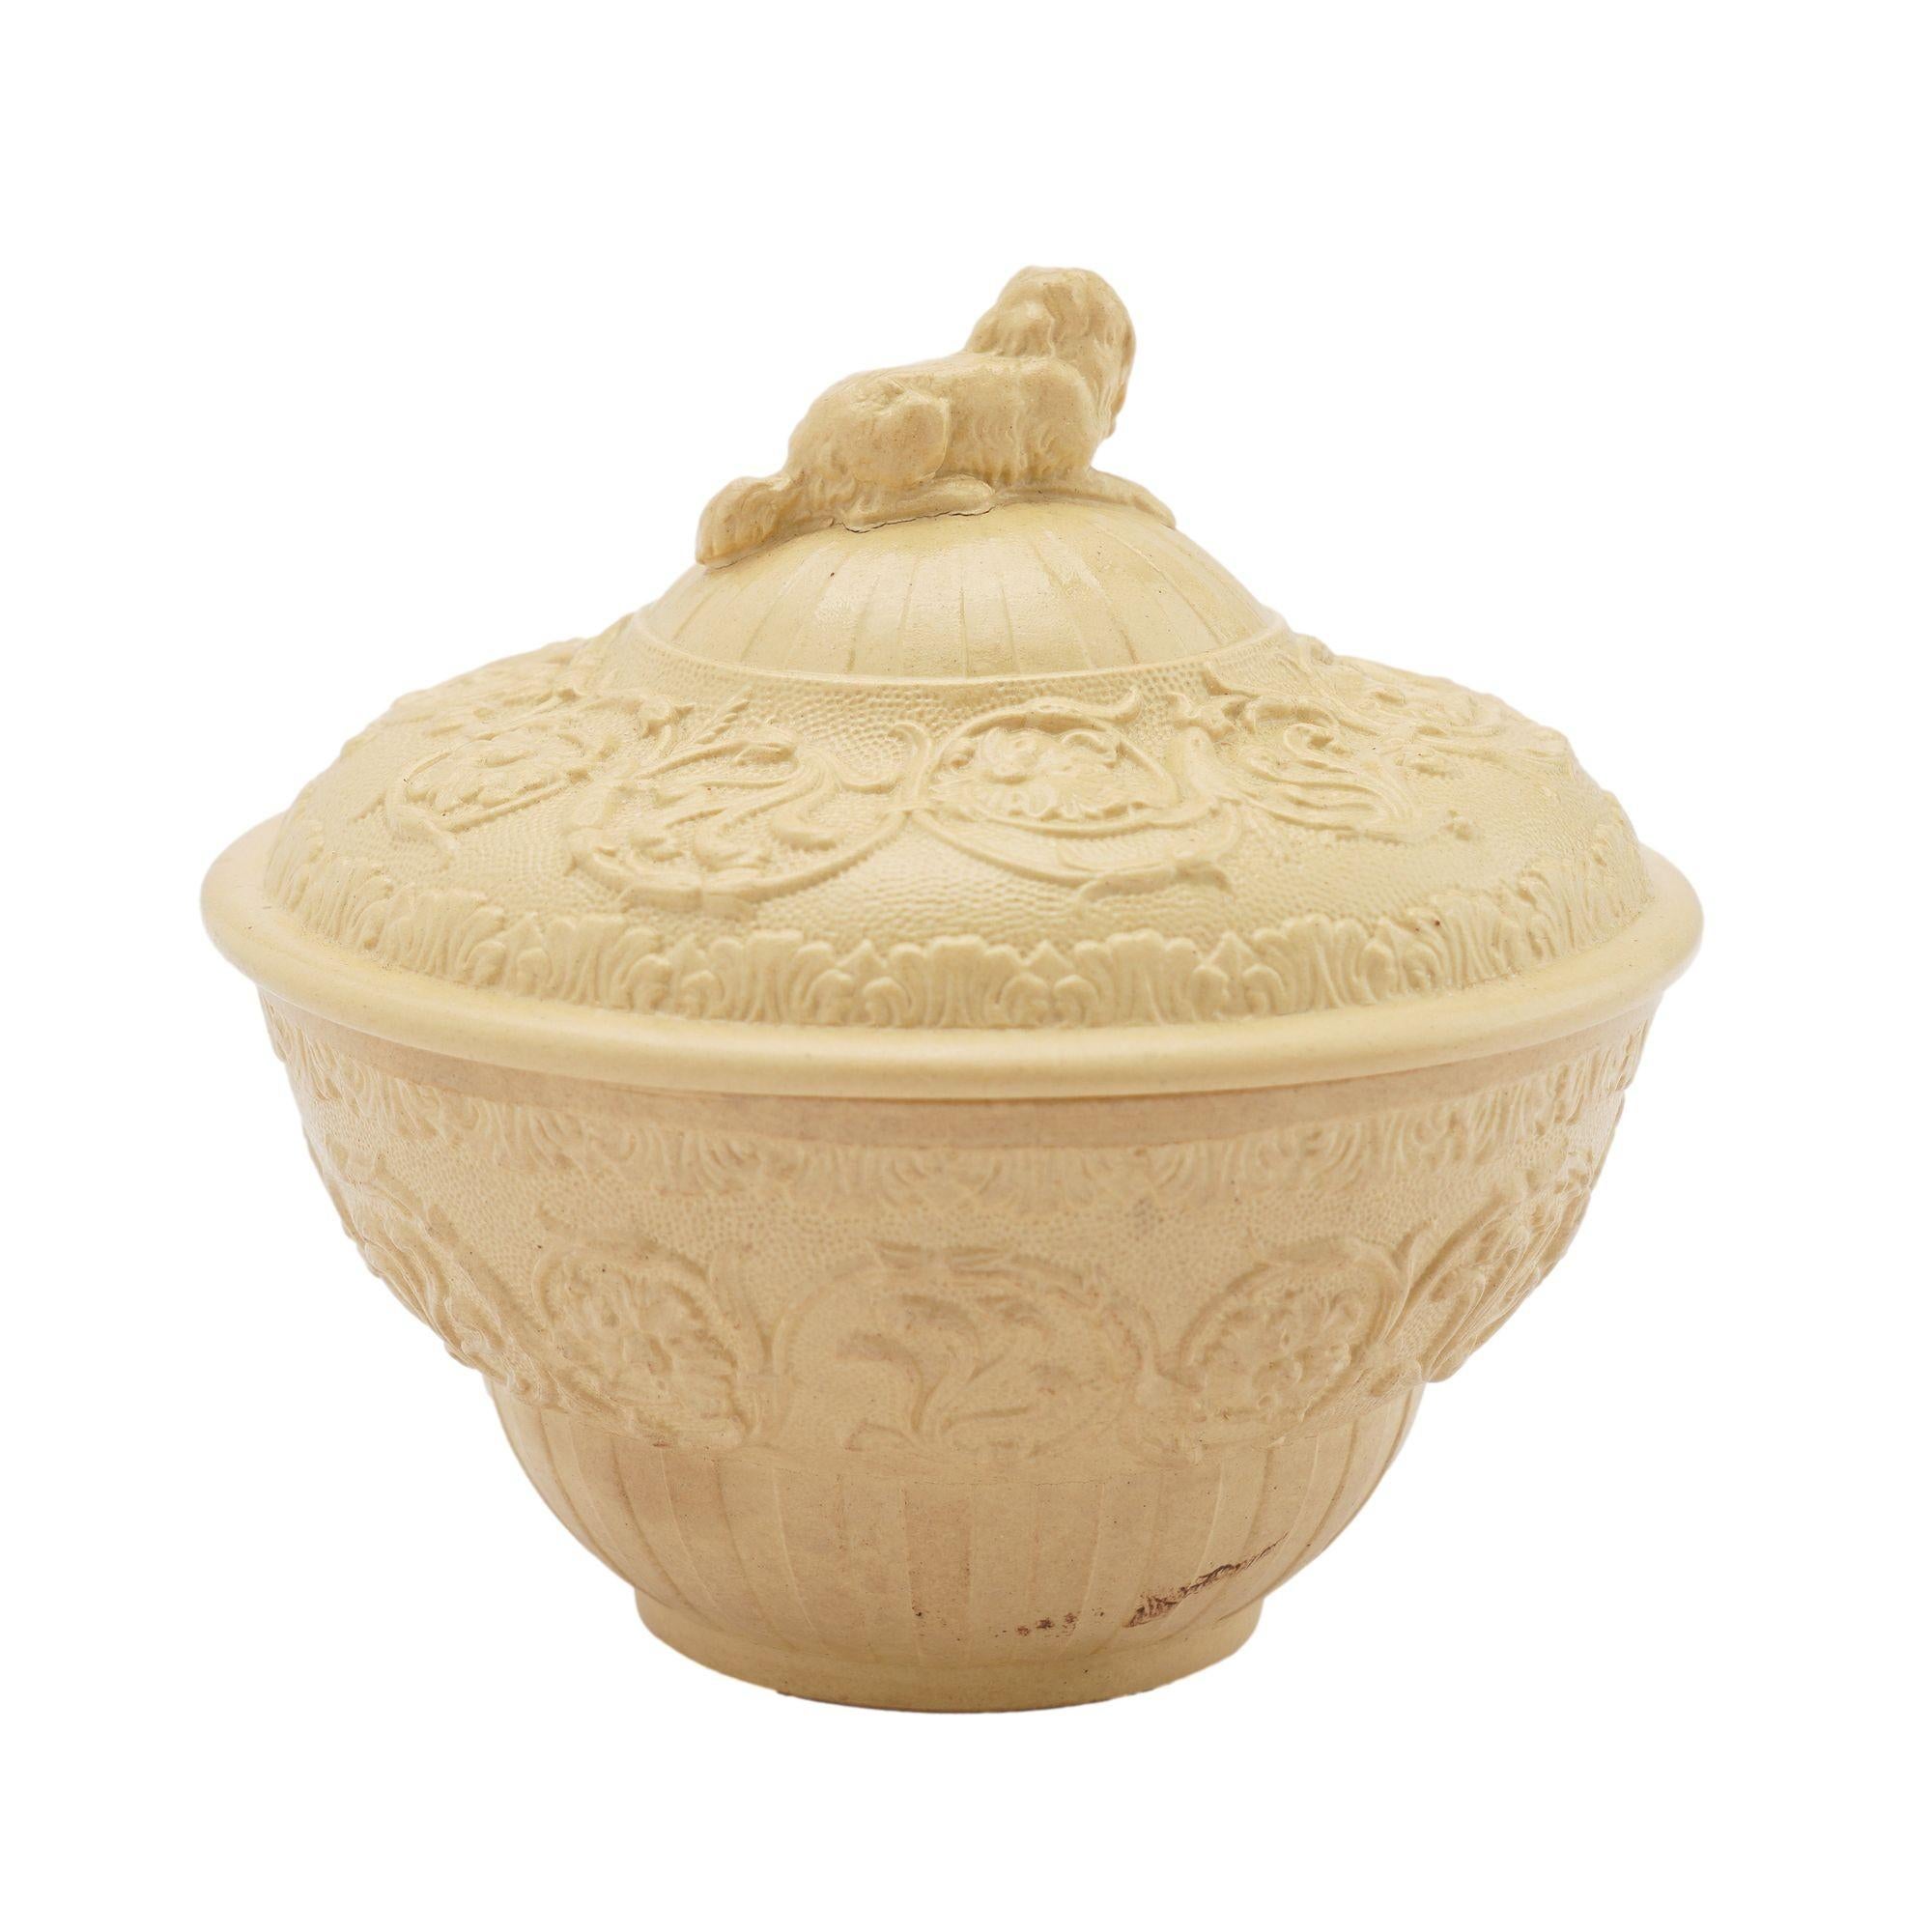 Wedgwood Caneware ceramic sugar bowl, c. 1815-20 In Good Condition For Sale In Kenilworth, IL